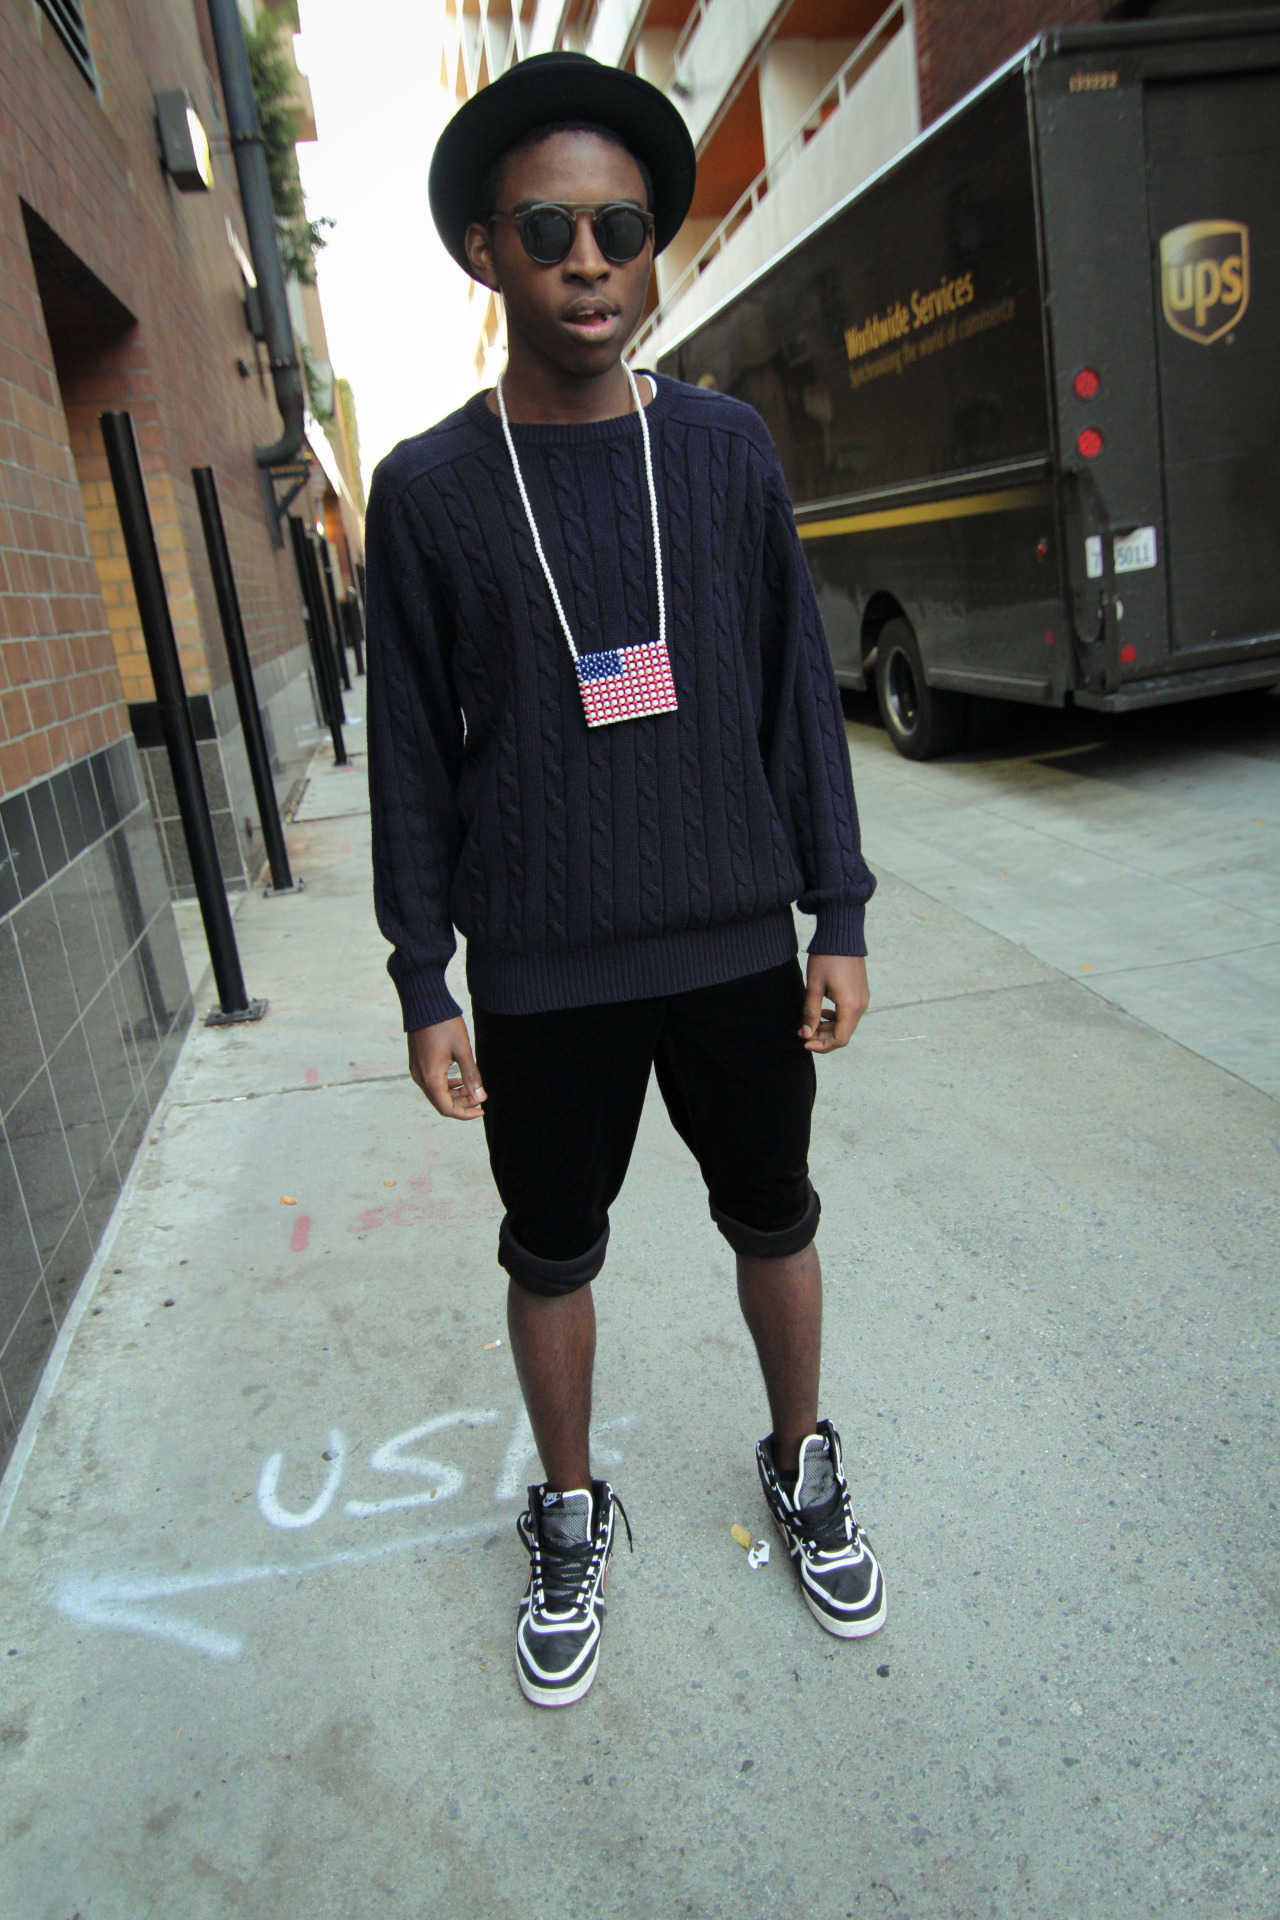 Jibril - Black America - My last look for 2012 looked quite modern. I&#8217;ve had these sneakers  forever, but never wear them much. the shorts were velvet pants rolled up, and the knitt sweater was given to me by an uncle back in paris. And the american flag chain is from Jet rag a vintage store here in LA. I loved the combo i think it really made me look like some sort of celebrity on the go&#8230;Well i was in al black, maybe Kanye on the go?